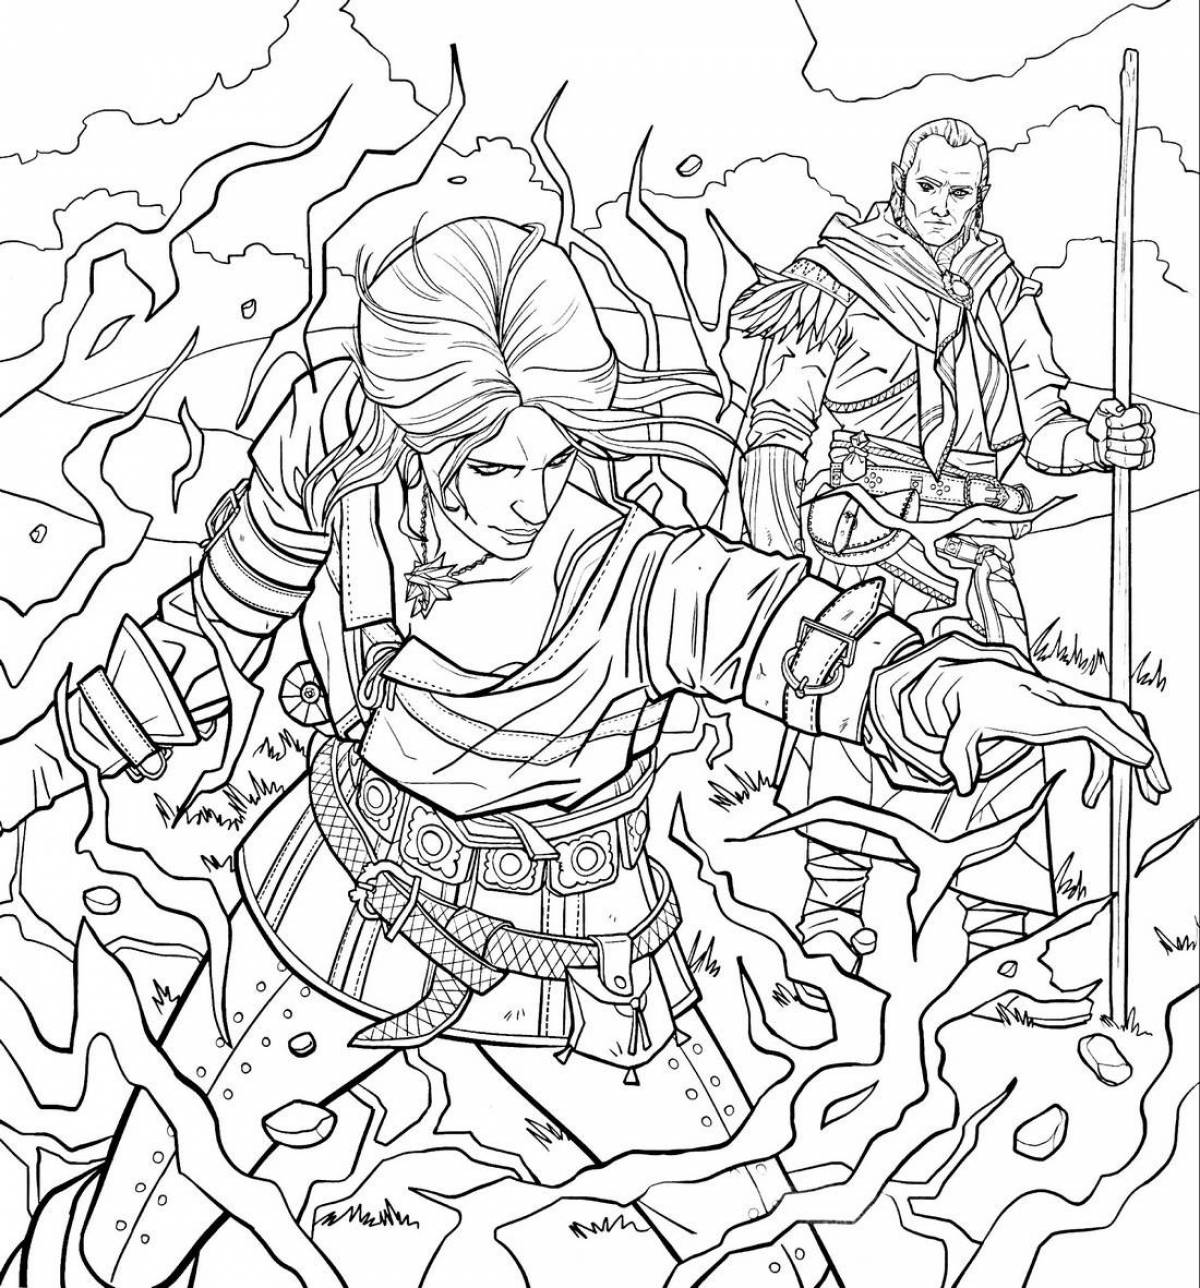 Enchant the witcher coloring book